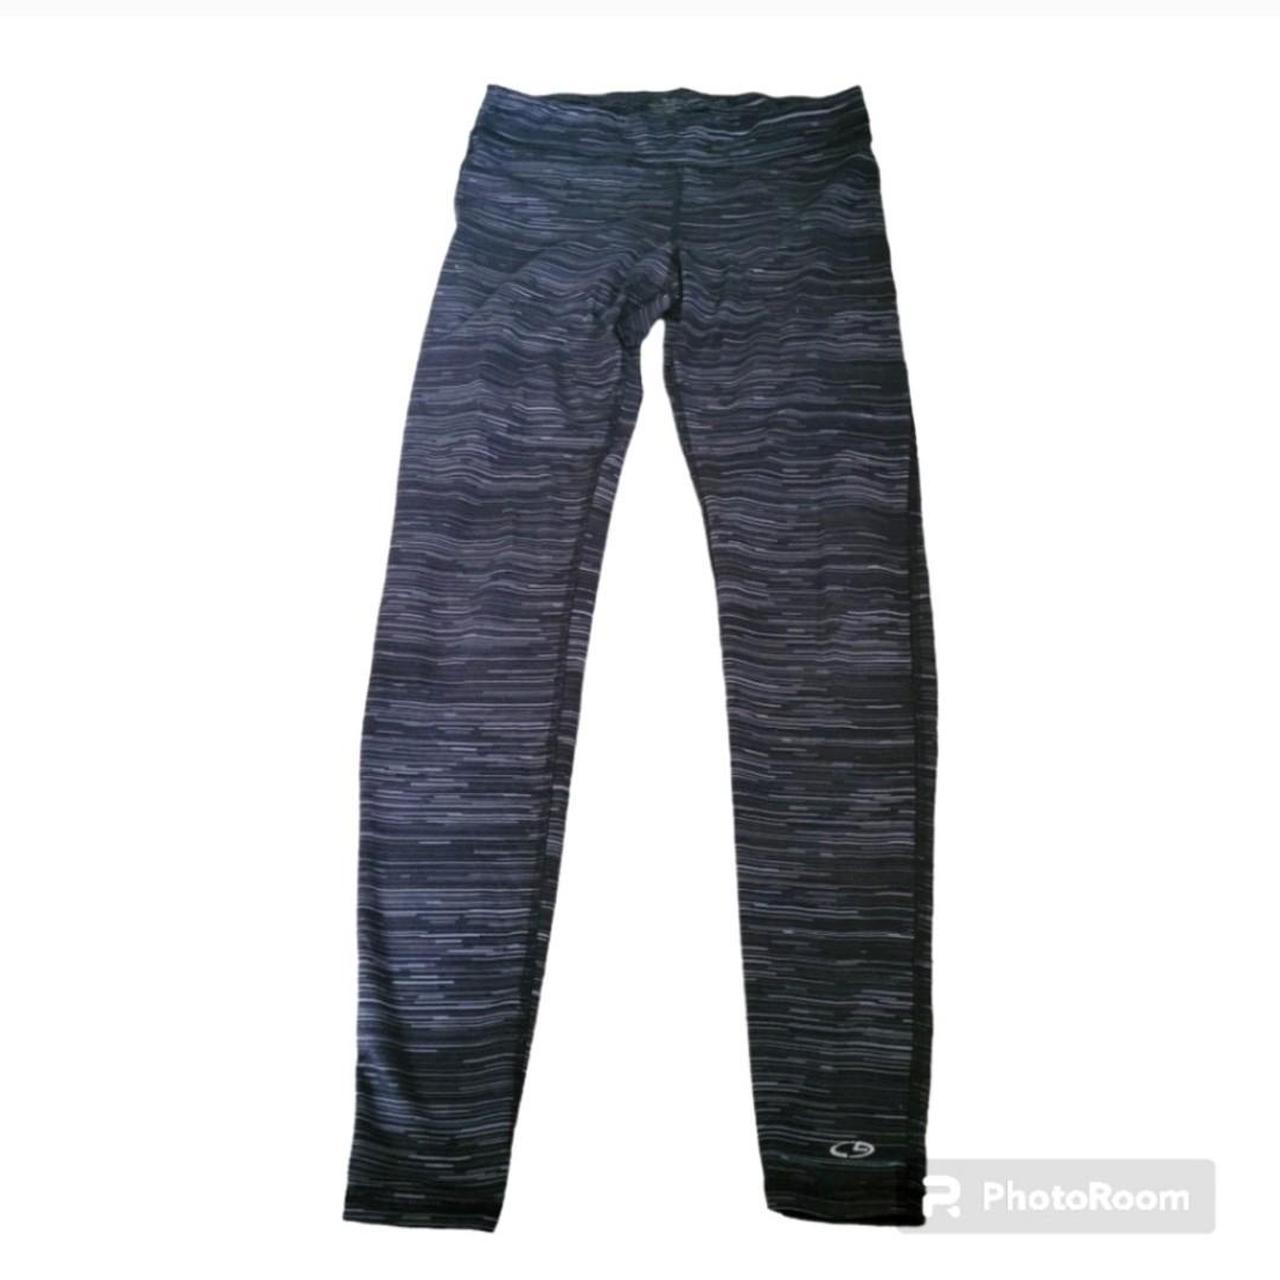 Champion duo dry leggings size small